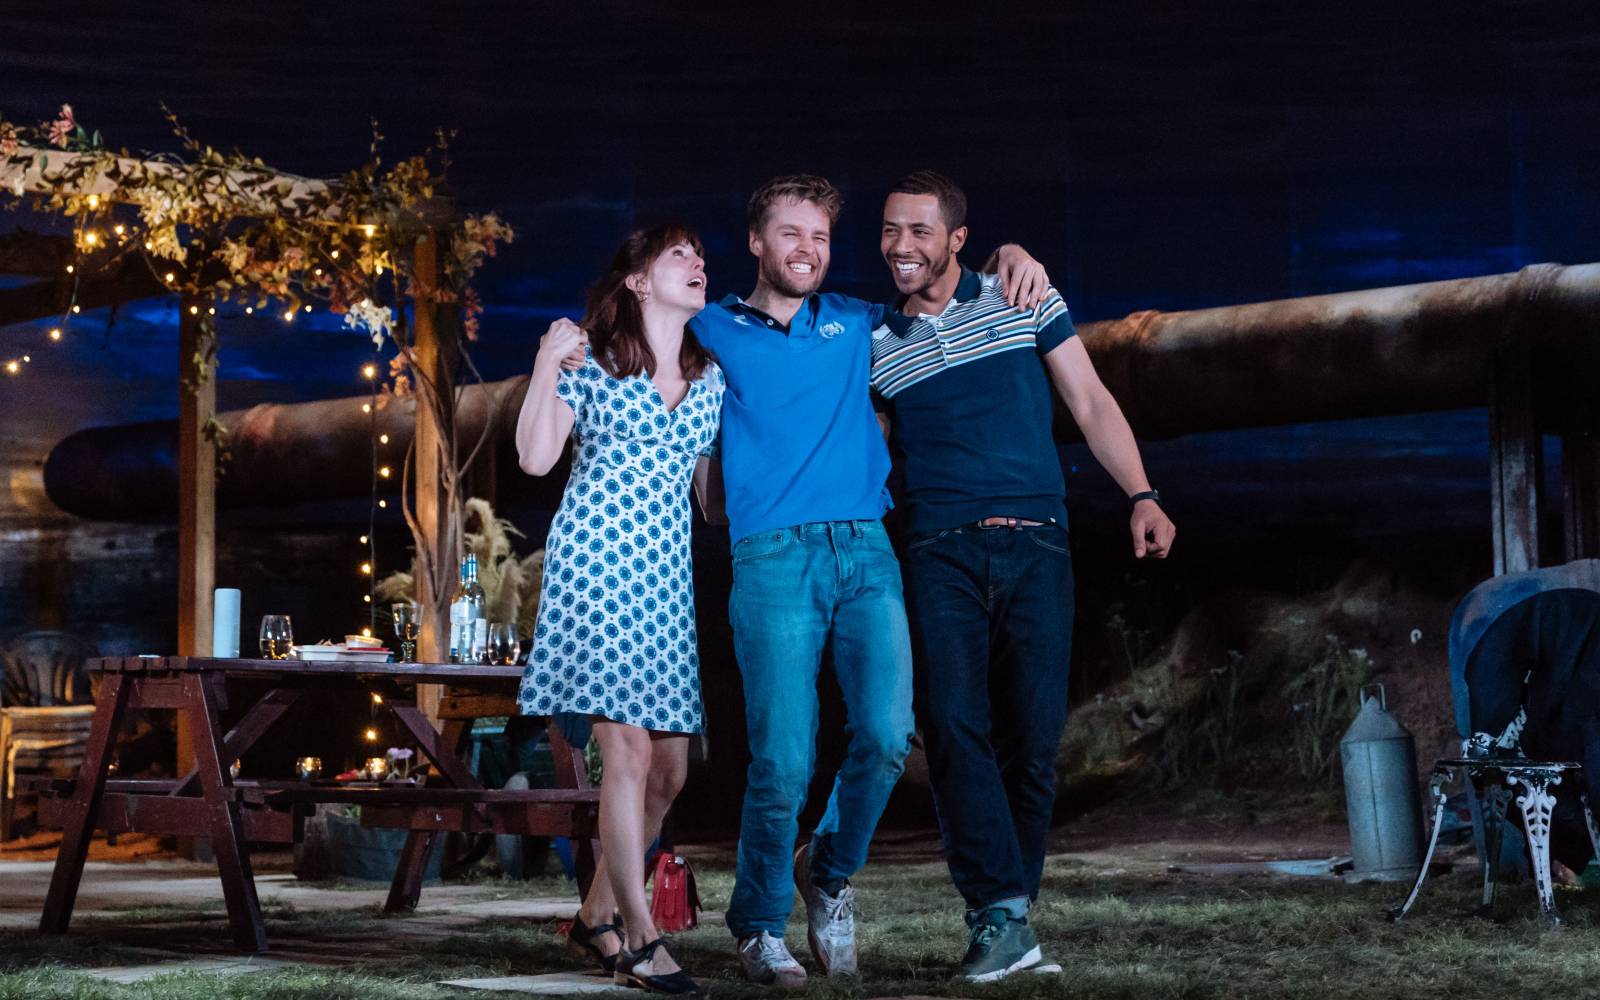 Three young adults look giddy, arms around each other, standing under the night sky